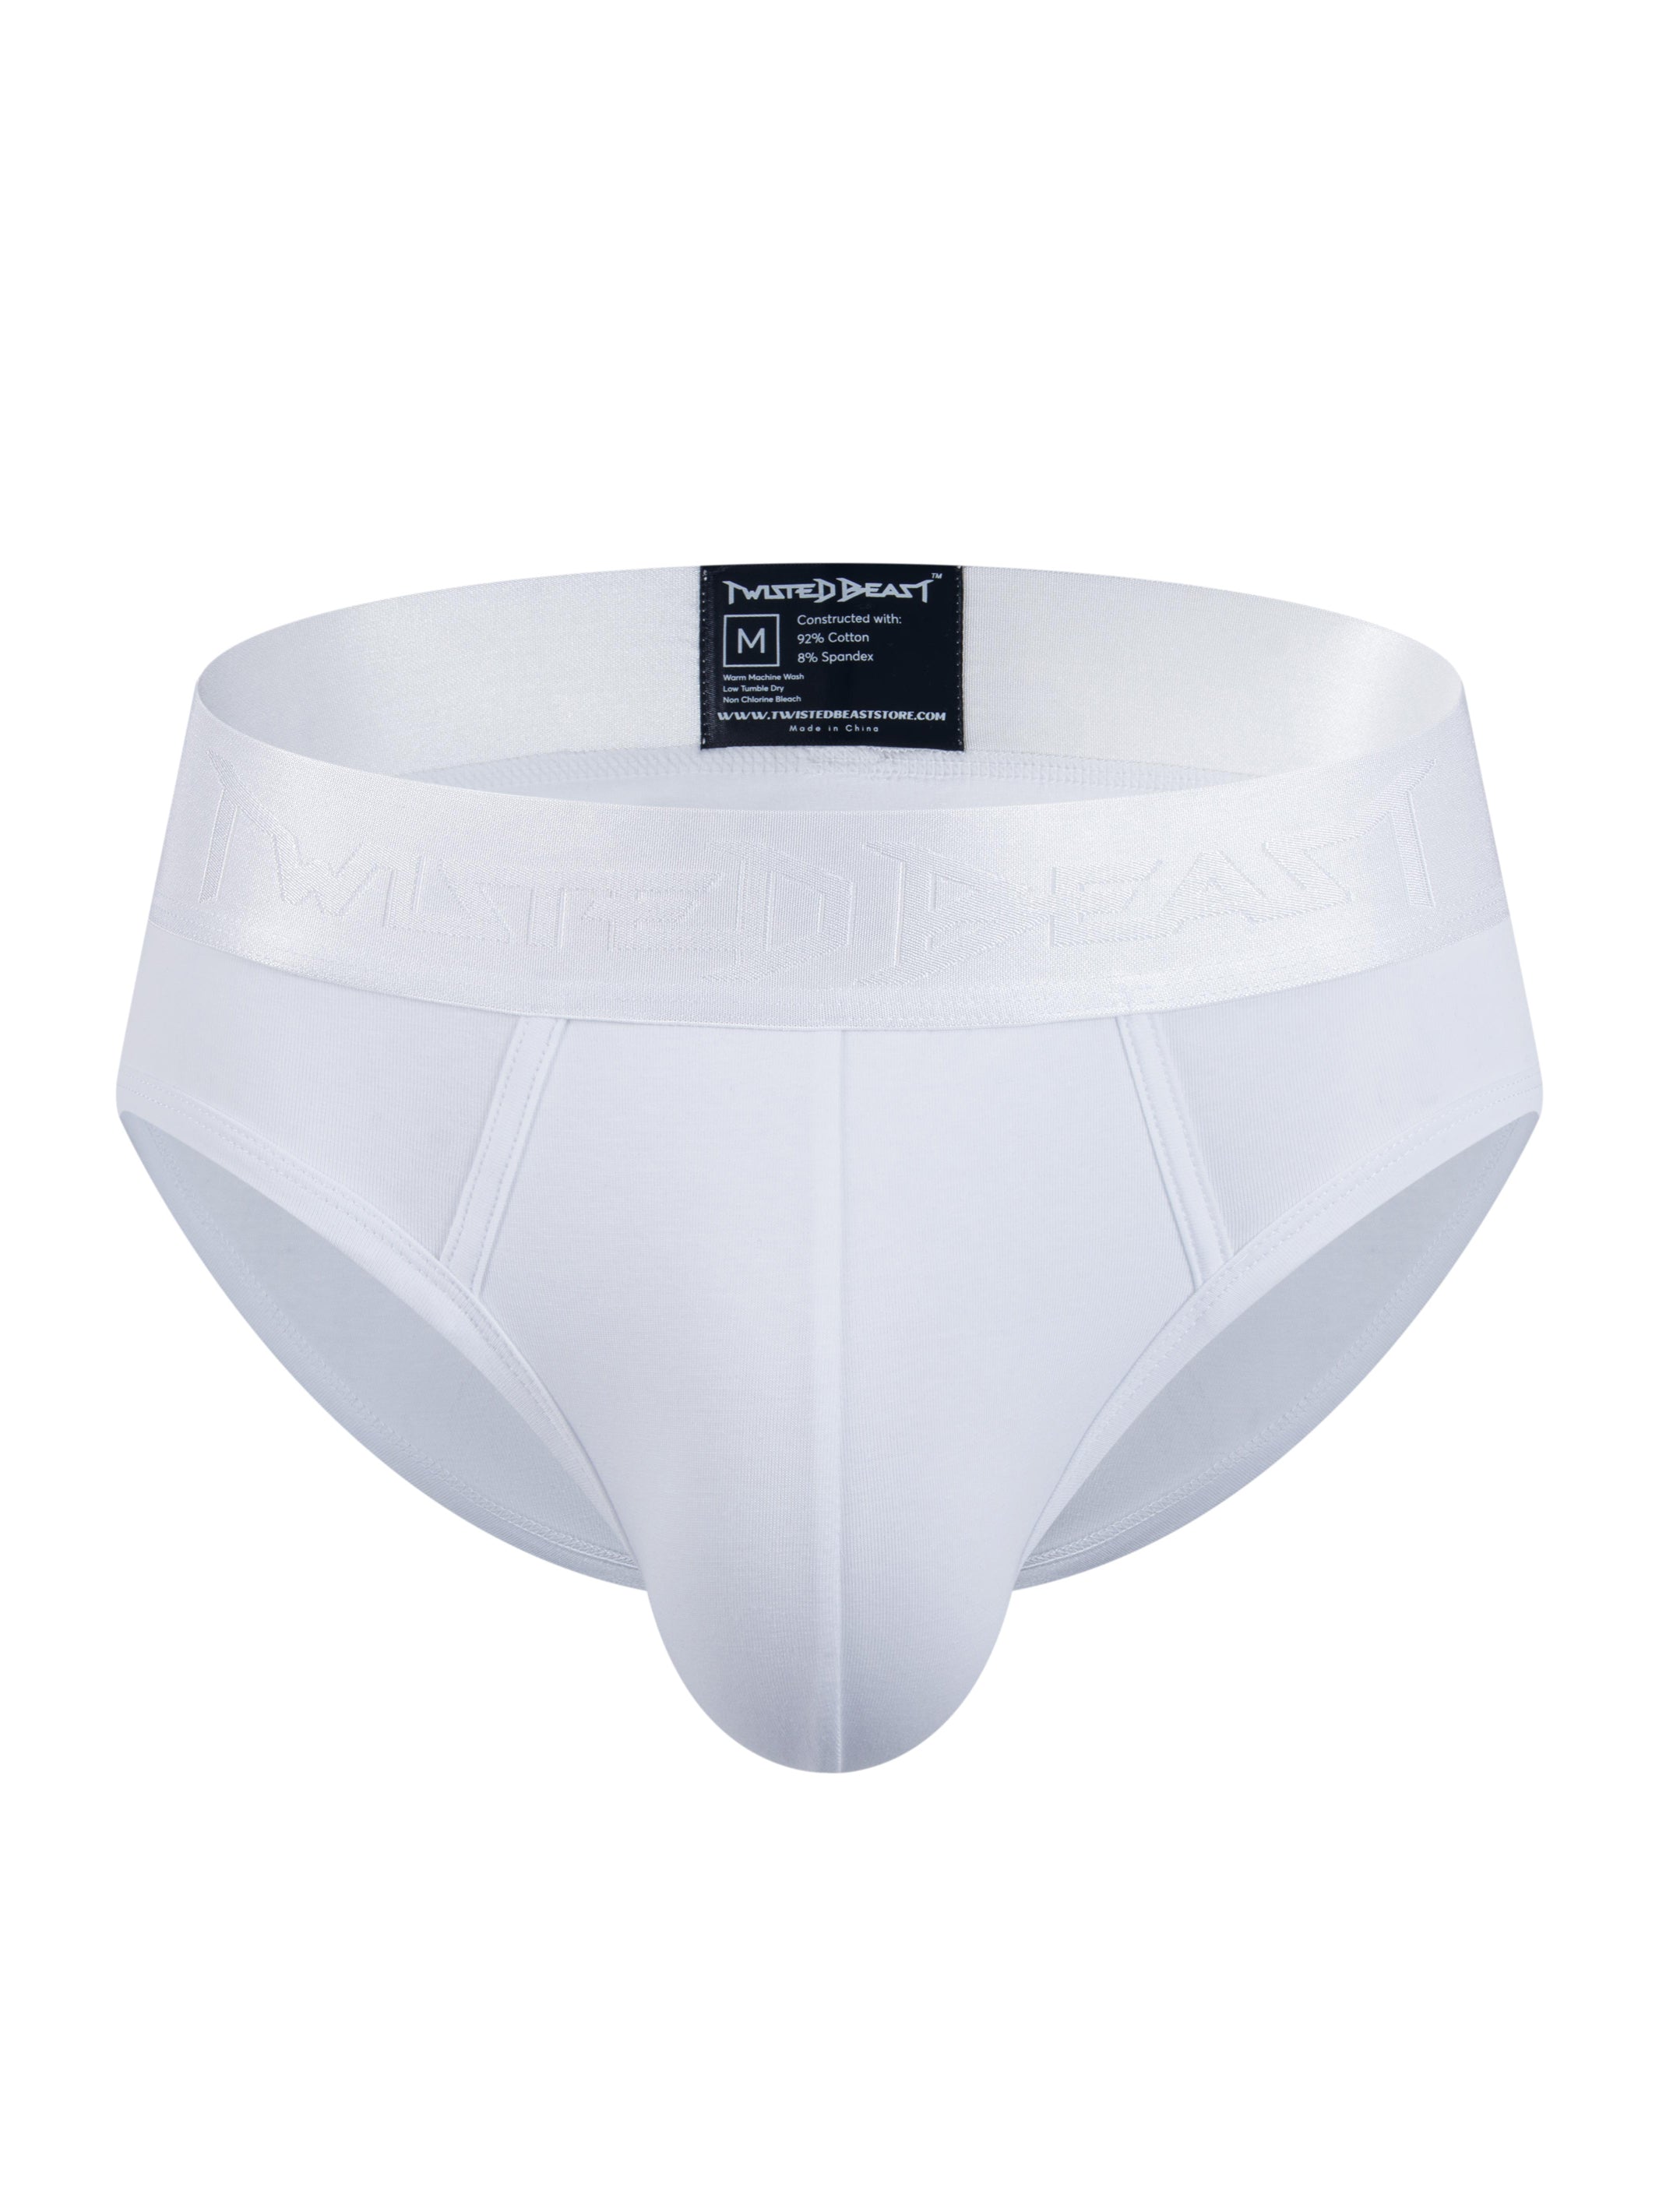 a frontal product photo of a pair of Phantom Briefs in white.